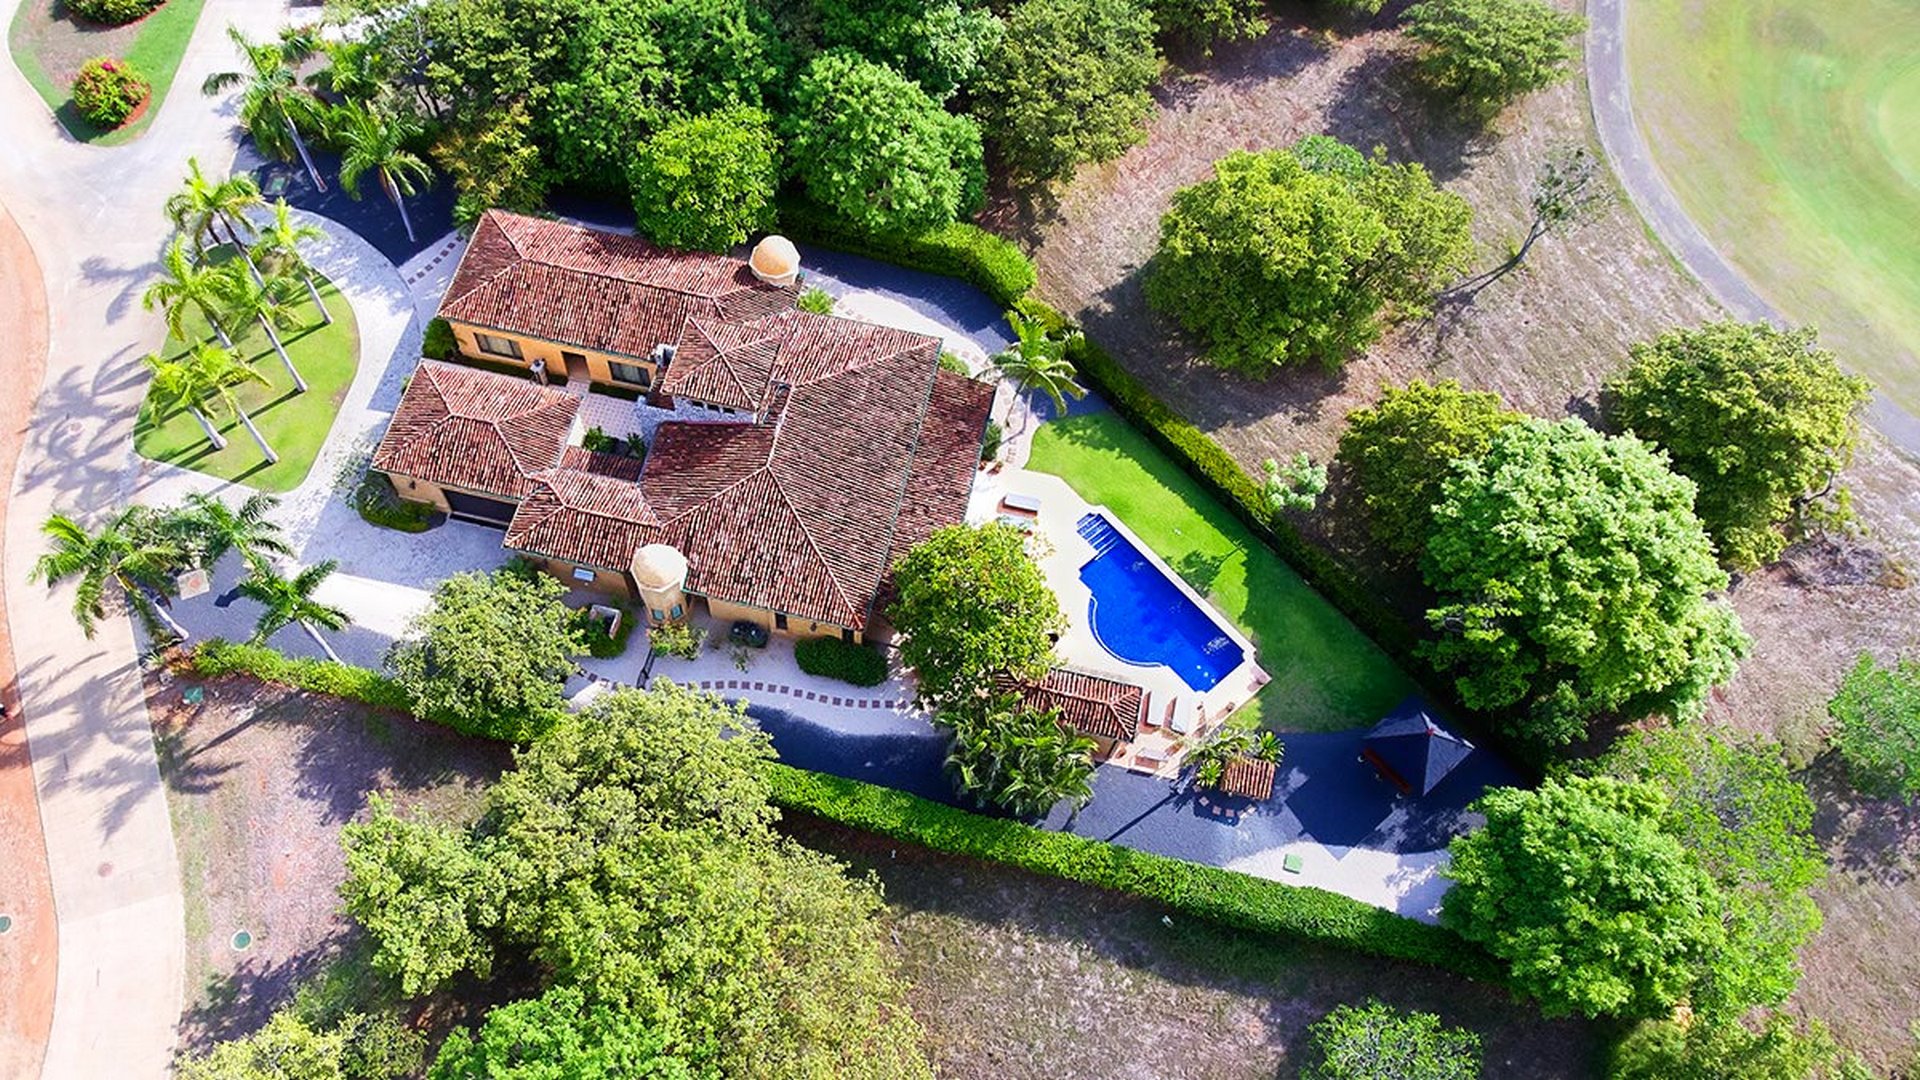 7353-The opulent home for sale in Costa, along a renowned golf course